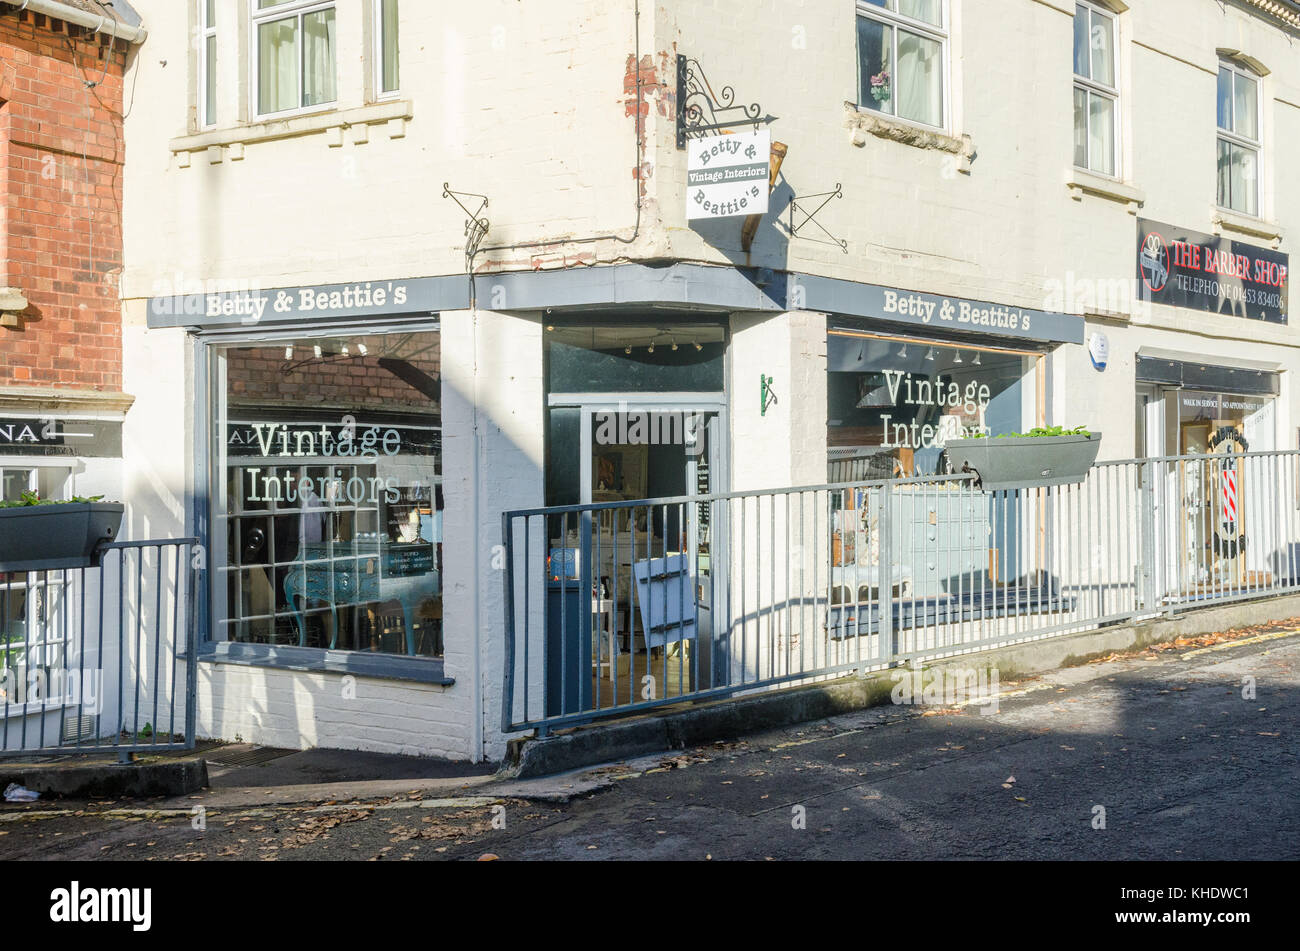 Betty and Beattie's Vintage Interiors Shop in Market Street, Nailsworth, Gloucestershire Stock Photo